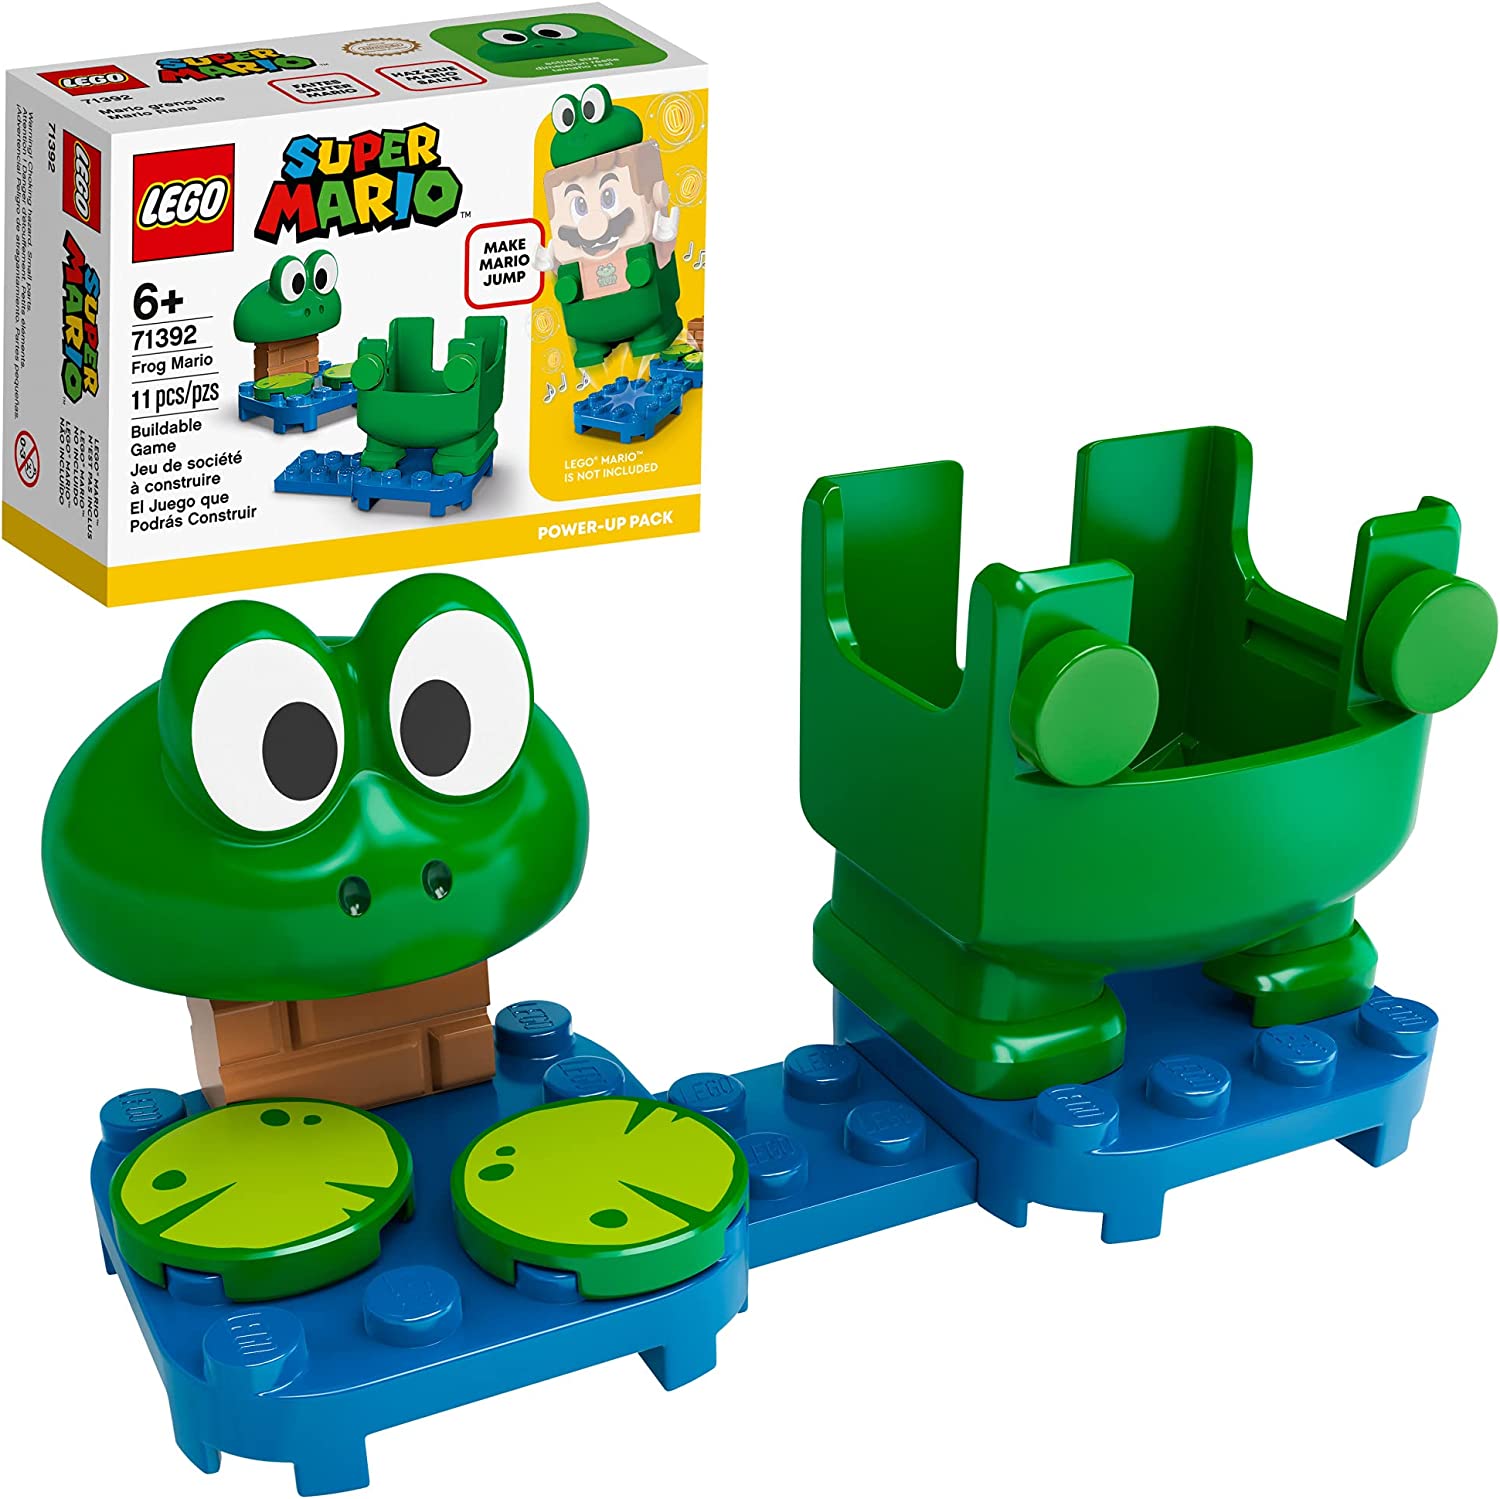 11-Piece LEGO Super Mario Frog Mario Power-Up Pack Building Kit (71392) $5.50 + Free Shipping w/ Prime or on $25+